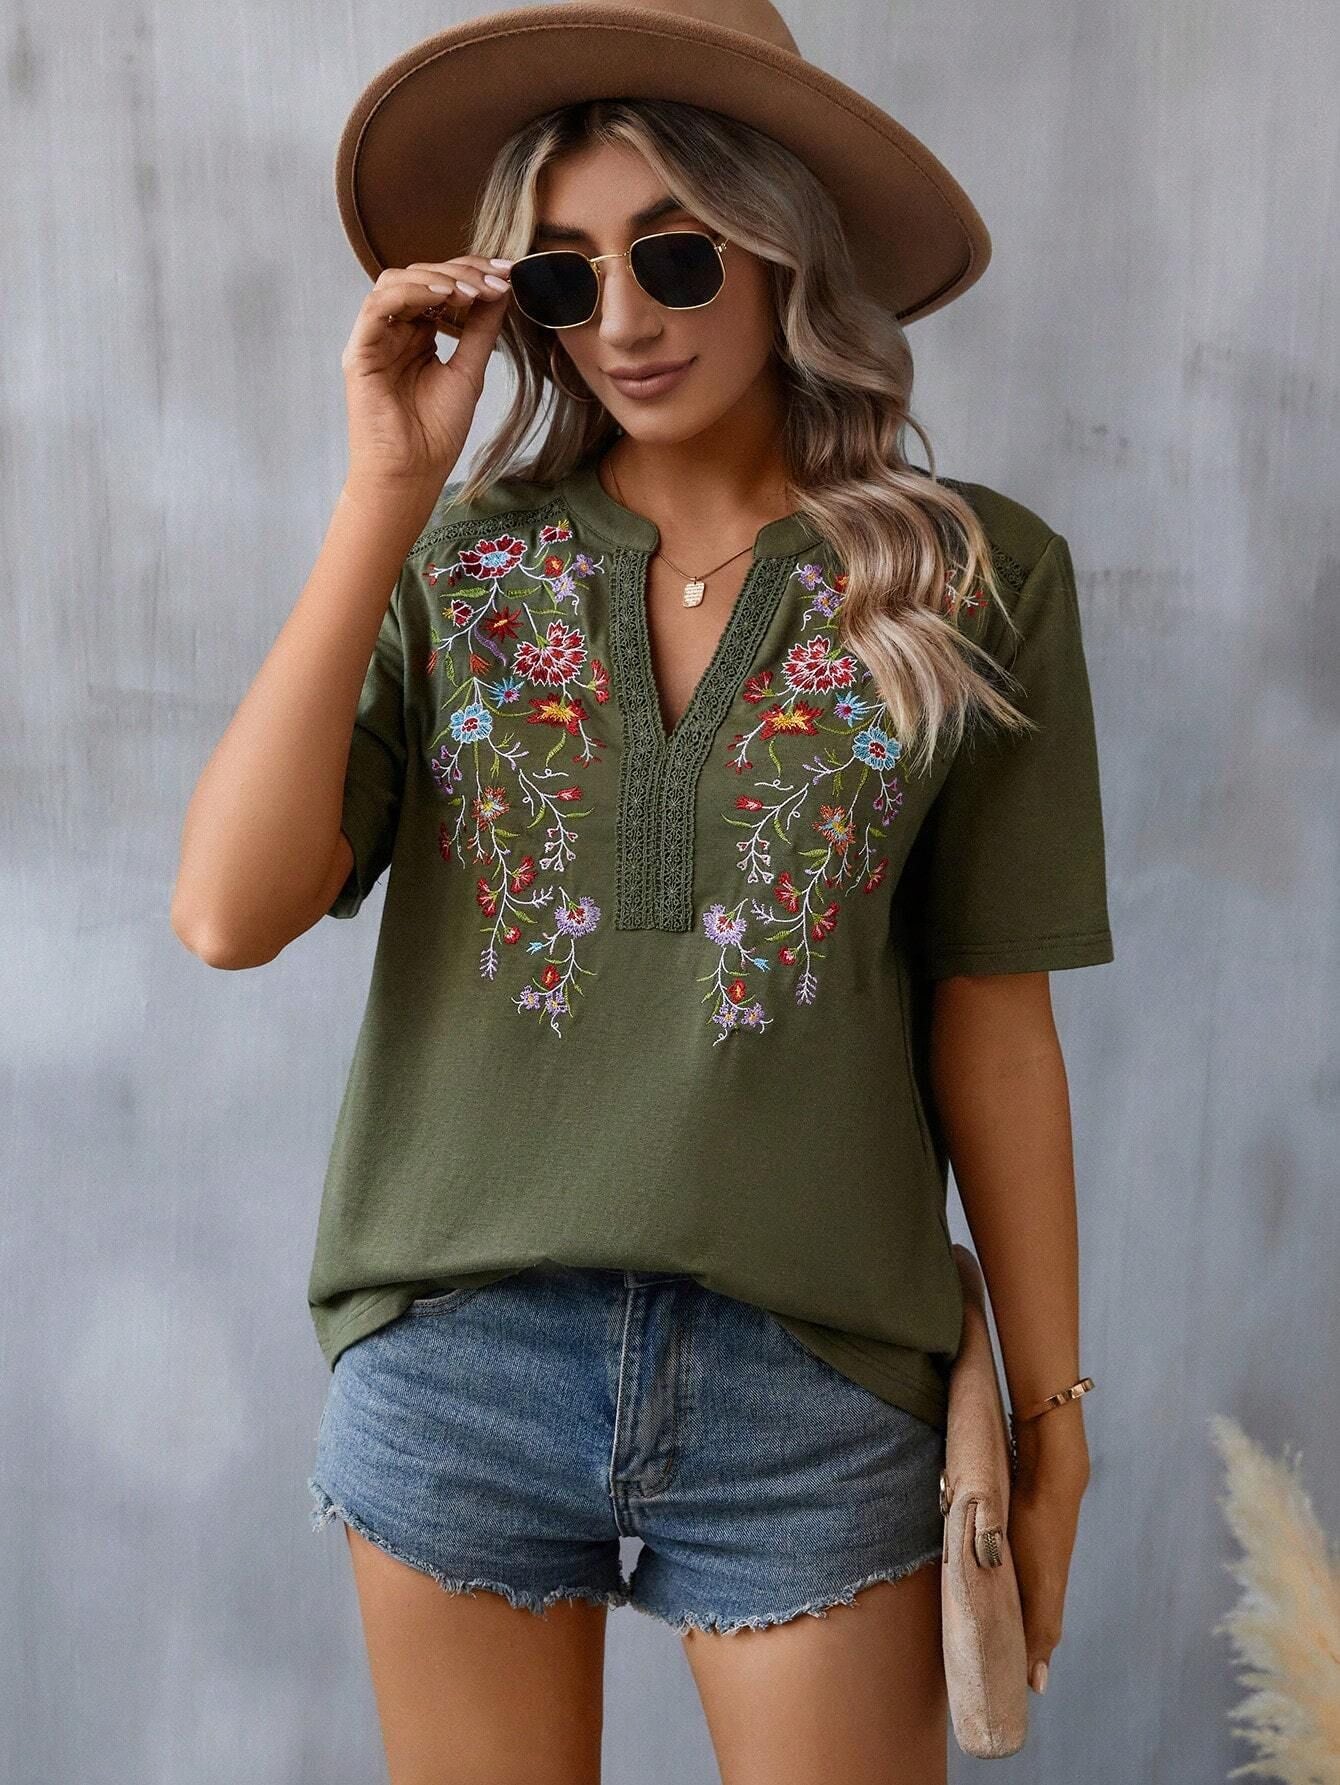 Women's Fashion Lace-Collared Blouse with Embroidery Stitching